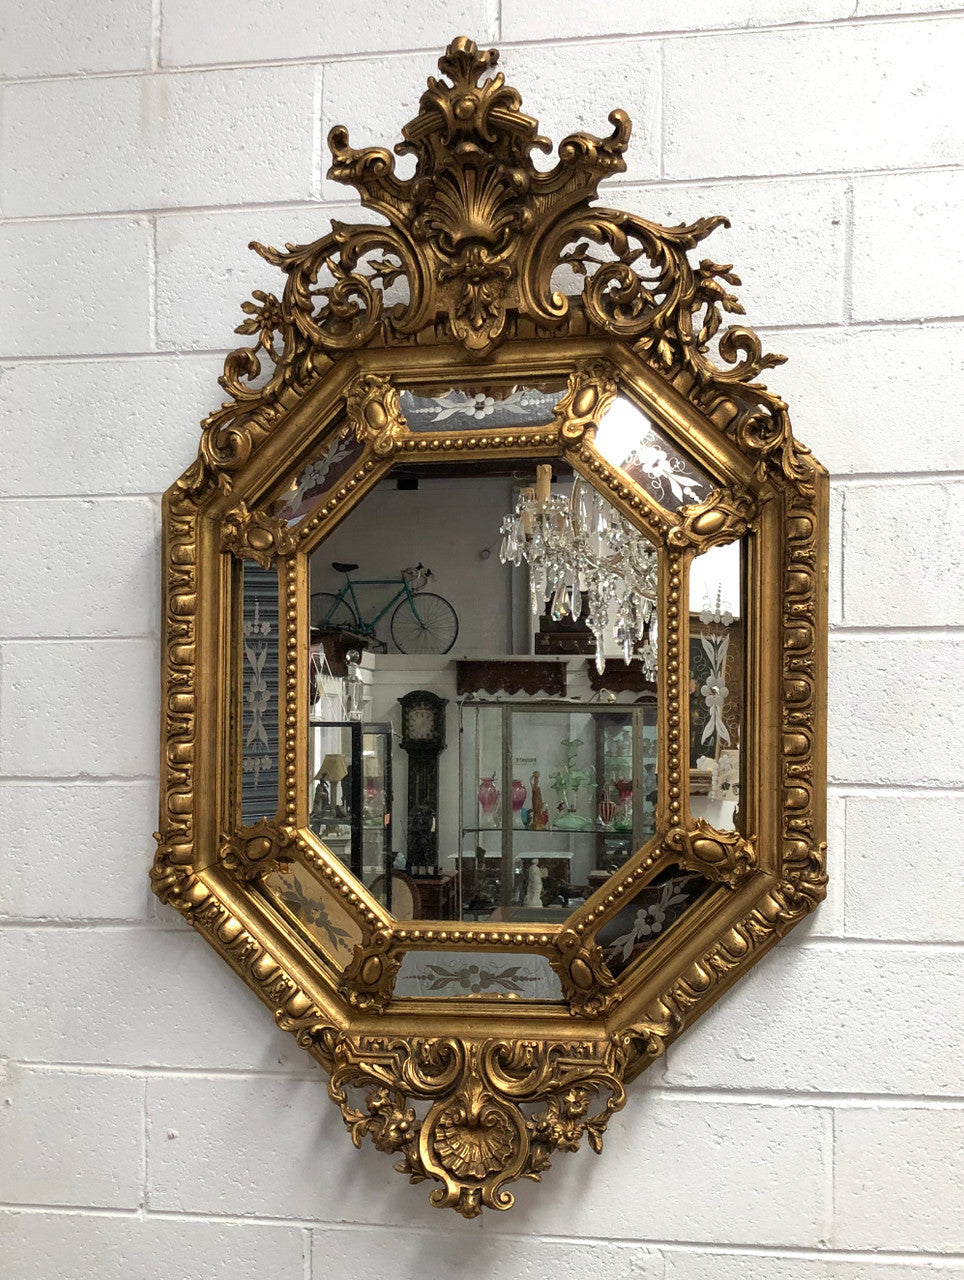 Early 19th Century gilt cushion mirror with acid etched floral pattern. In good condition. Please note original mirror does show some spotting commensurate with its age. Circa